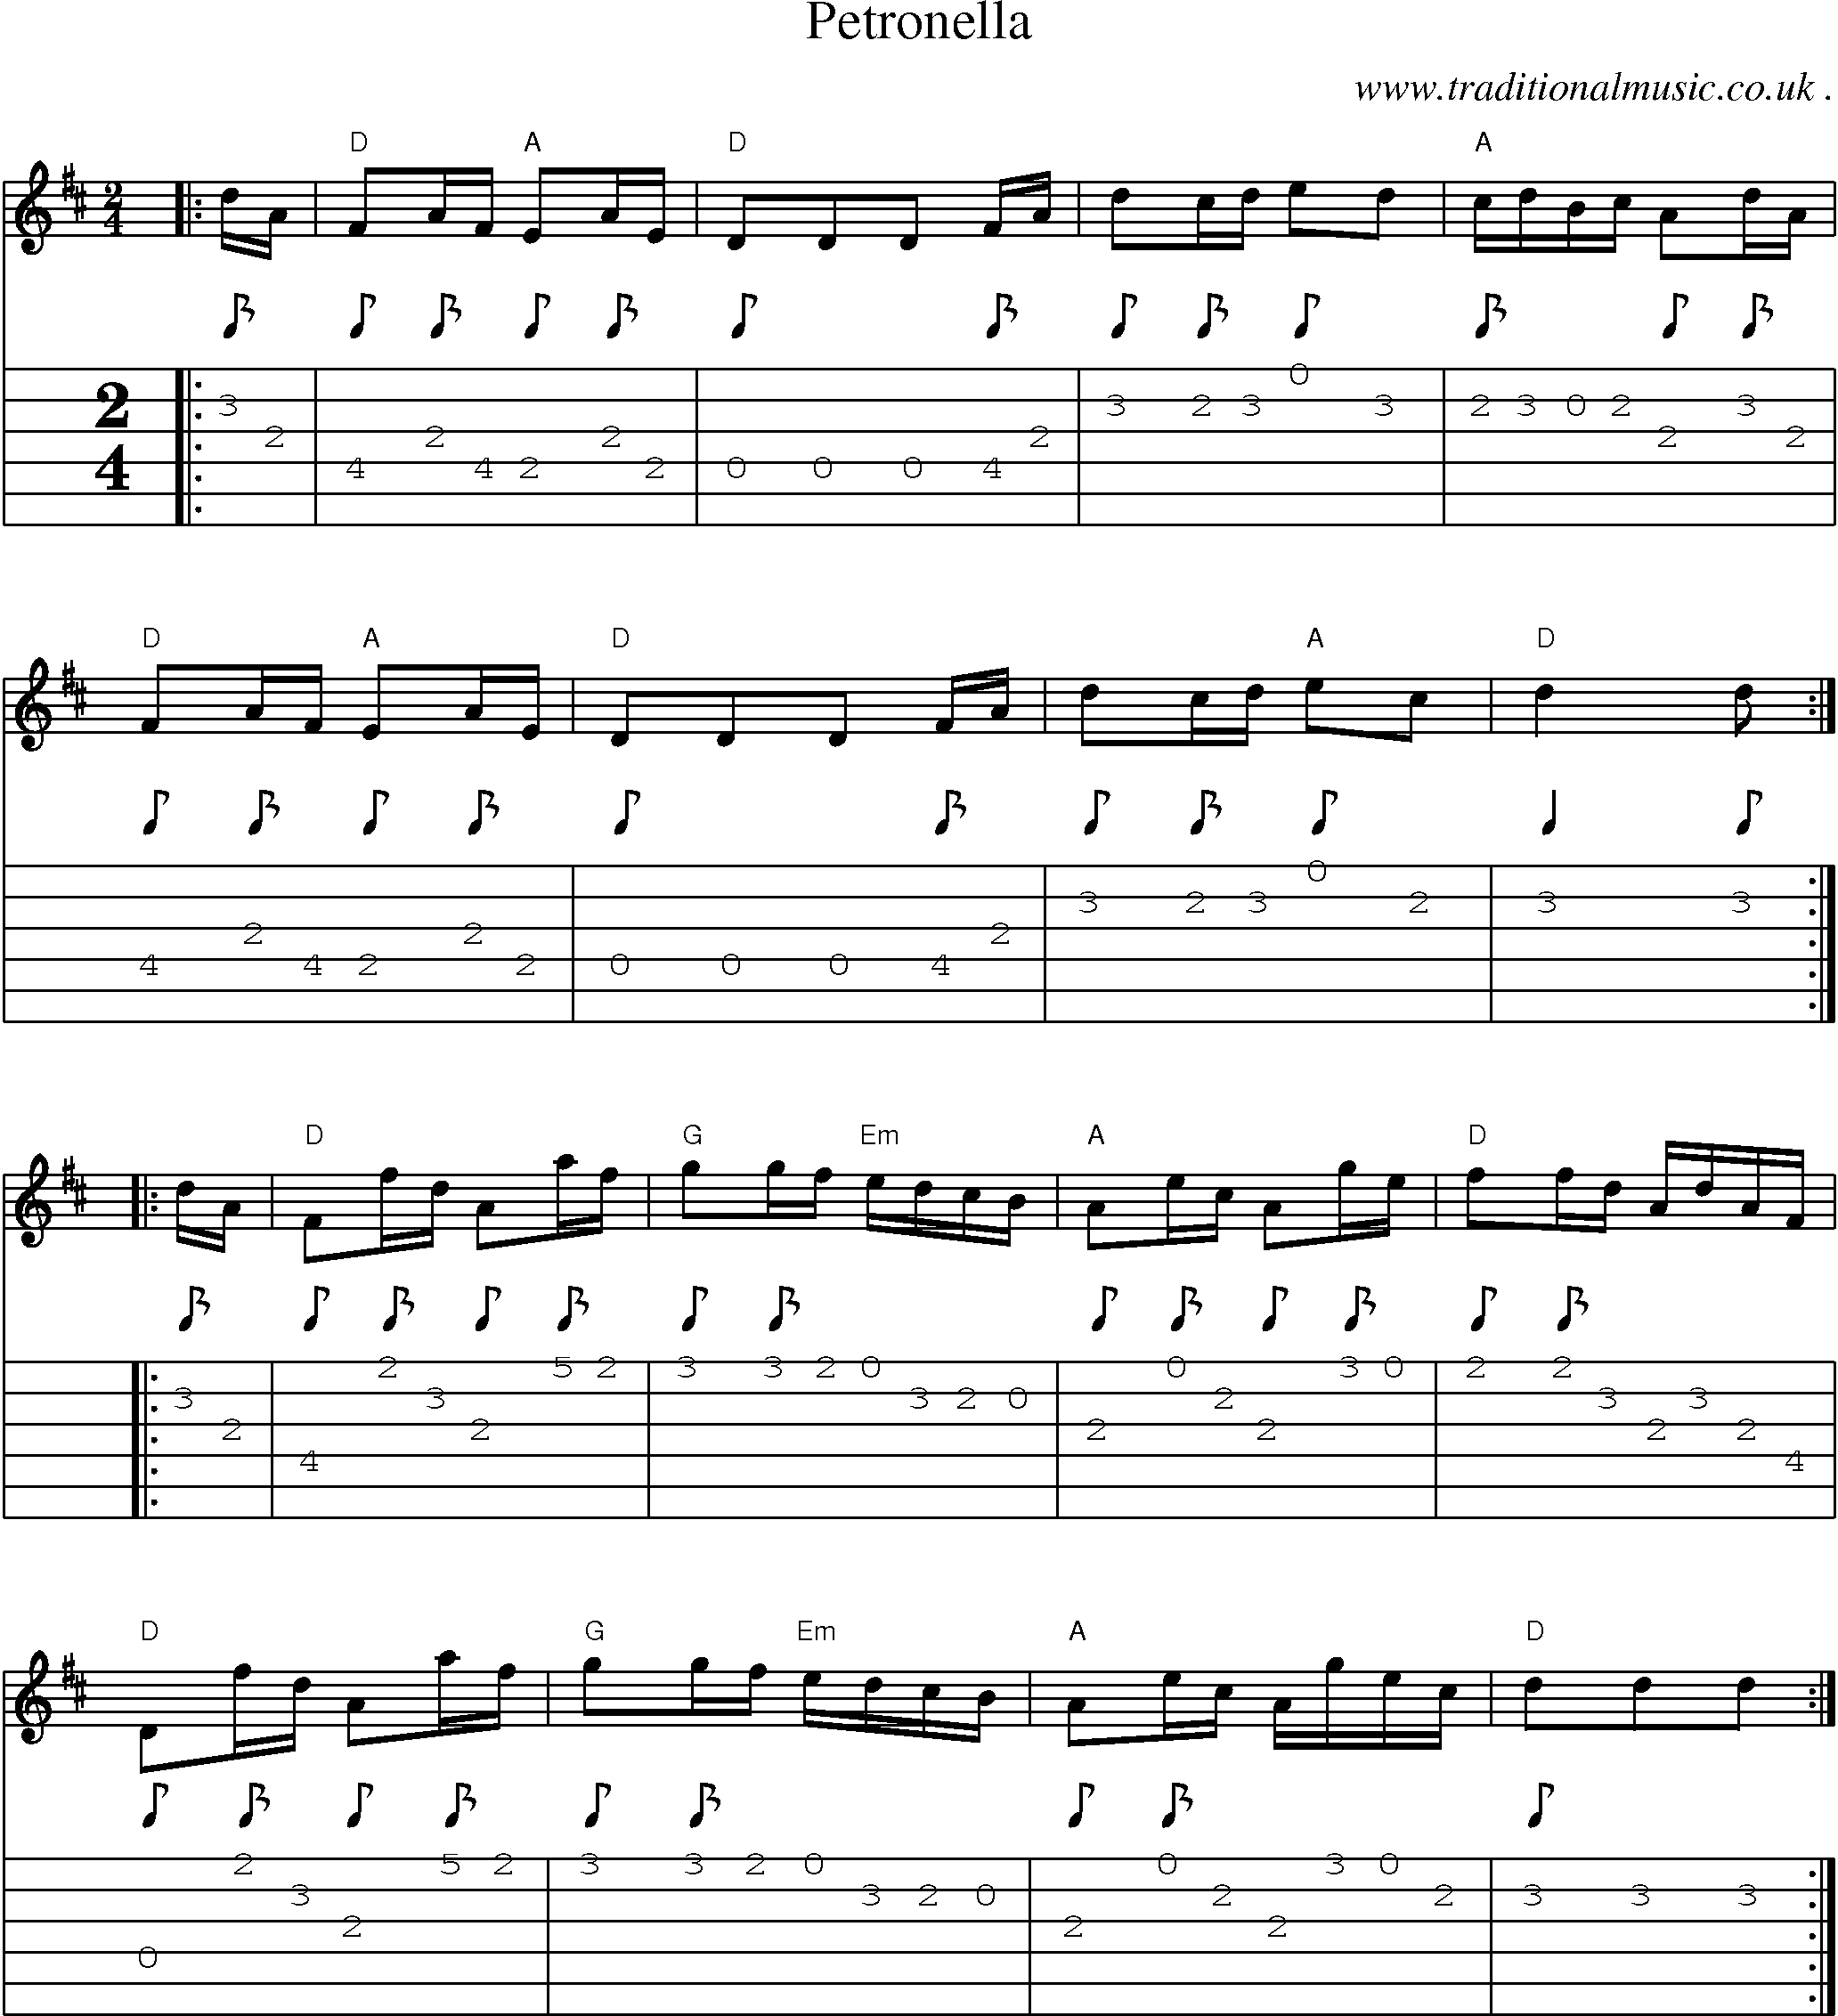 Music Score and Guitar Tabs for Petronella